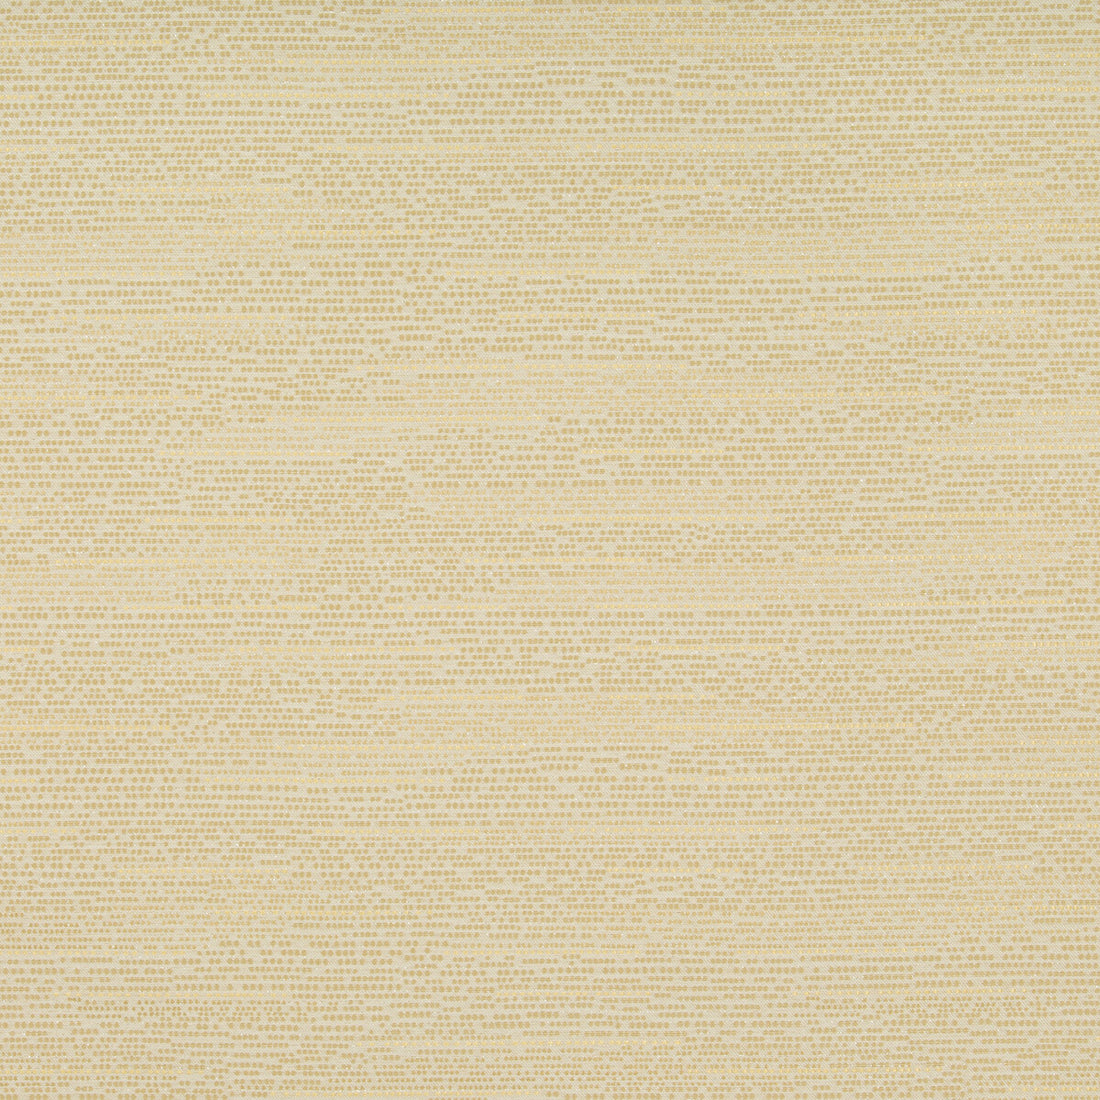 Waterline fabric in honey color - pattern 32934.14.0 - by Kravet Contract in the Gis Crypton collection